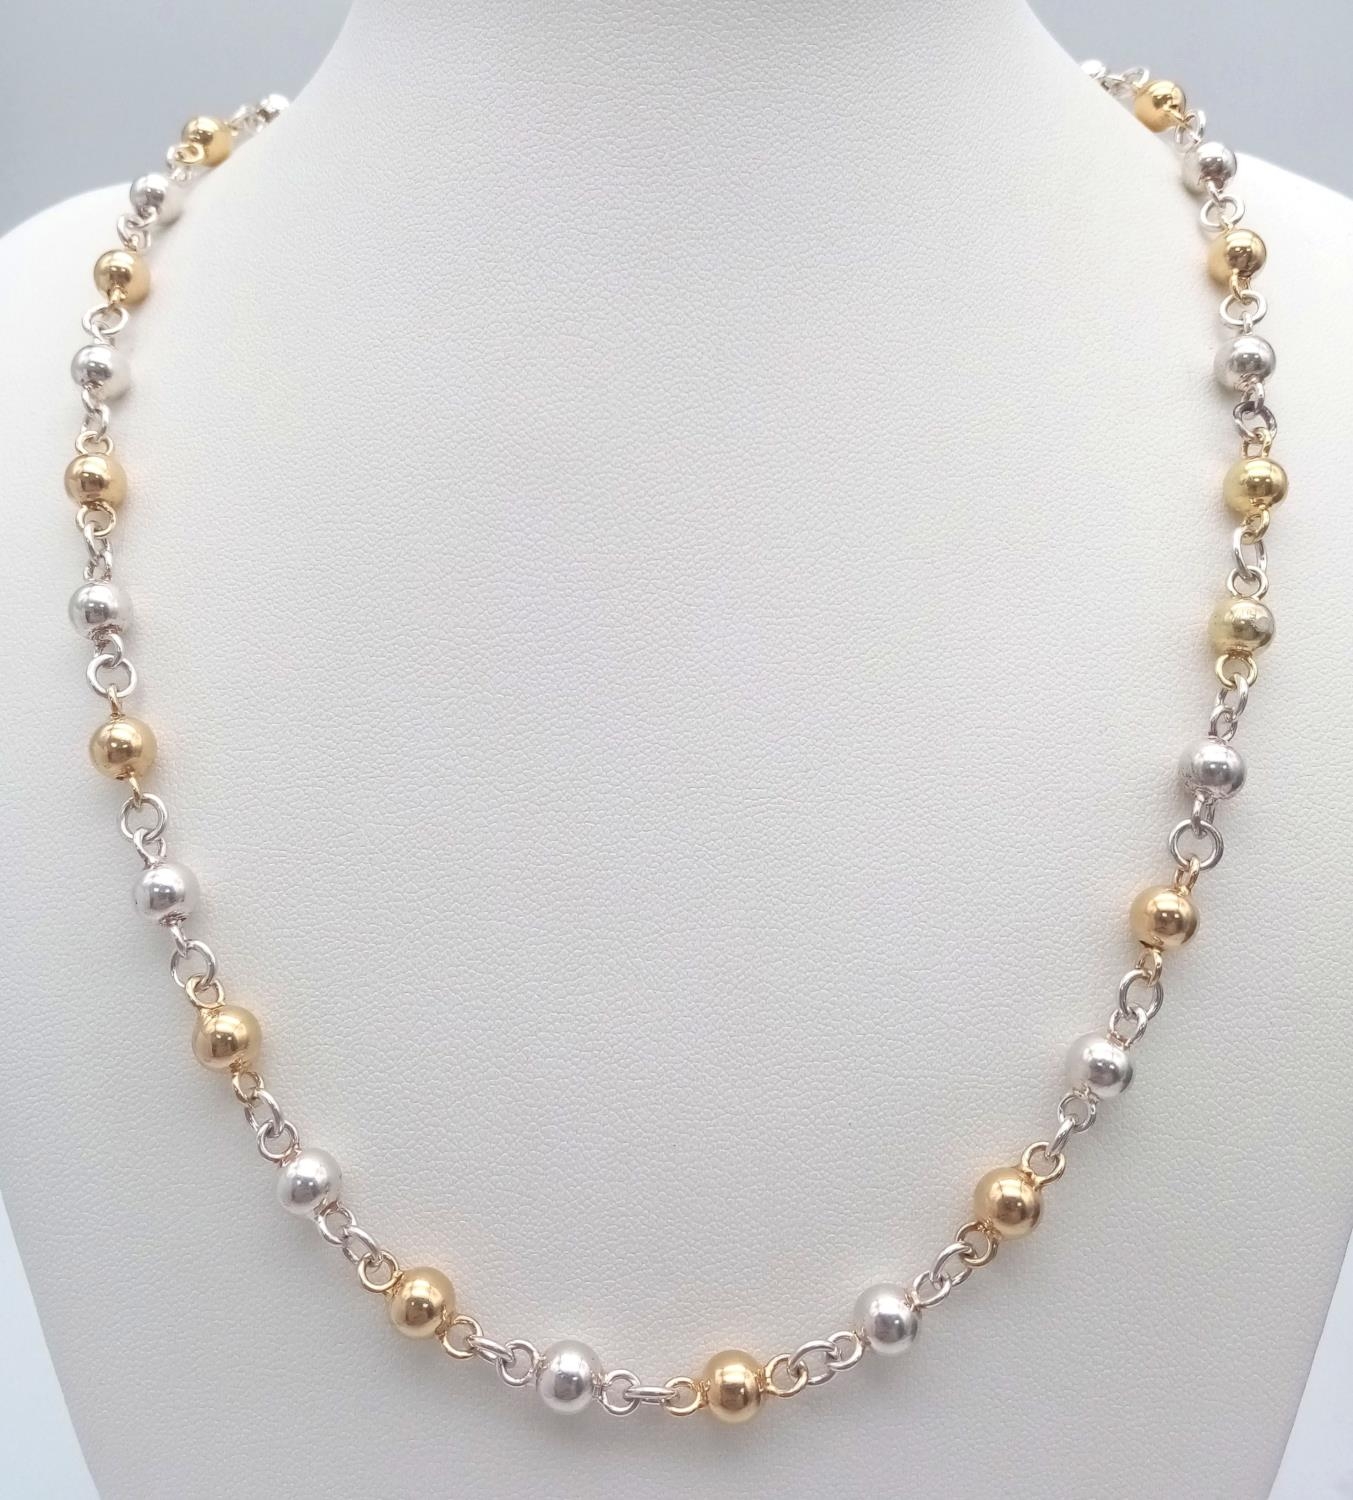 A 925 Silver and Gilded Bauble Necklace - 44cm. 19.5g